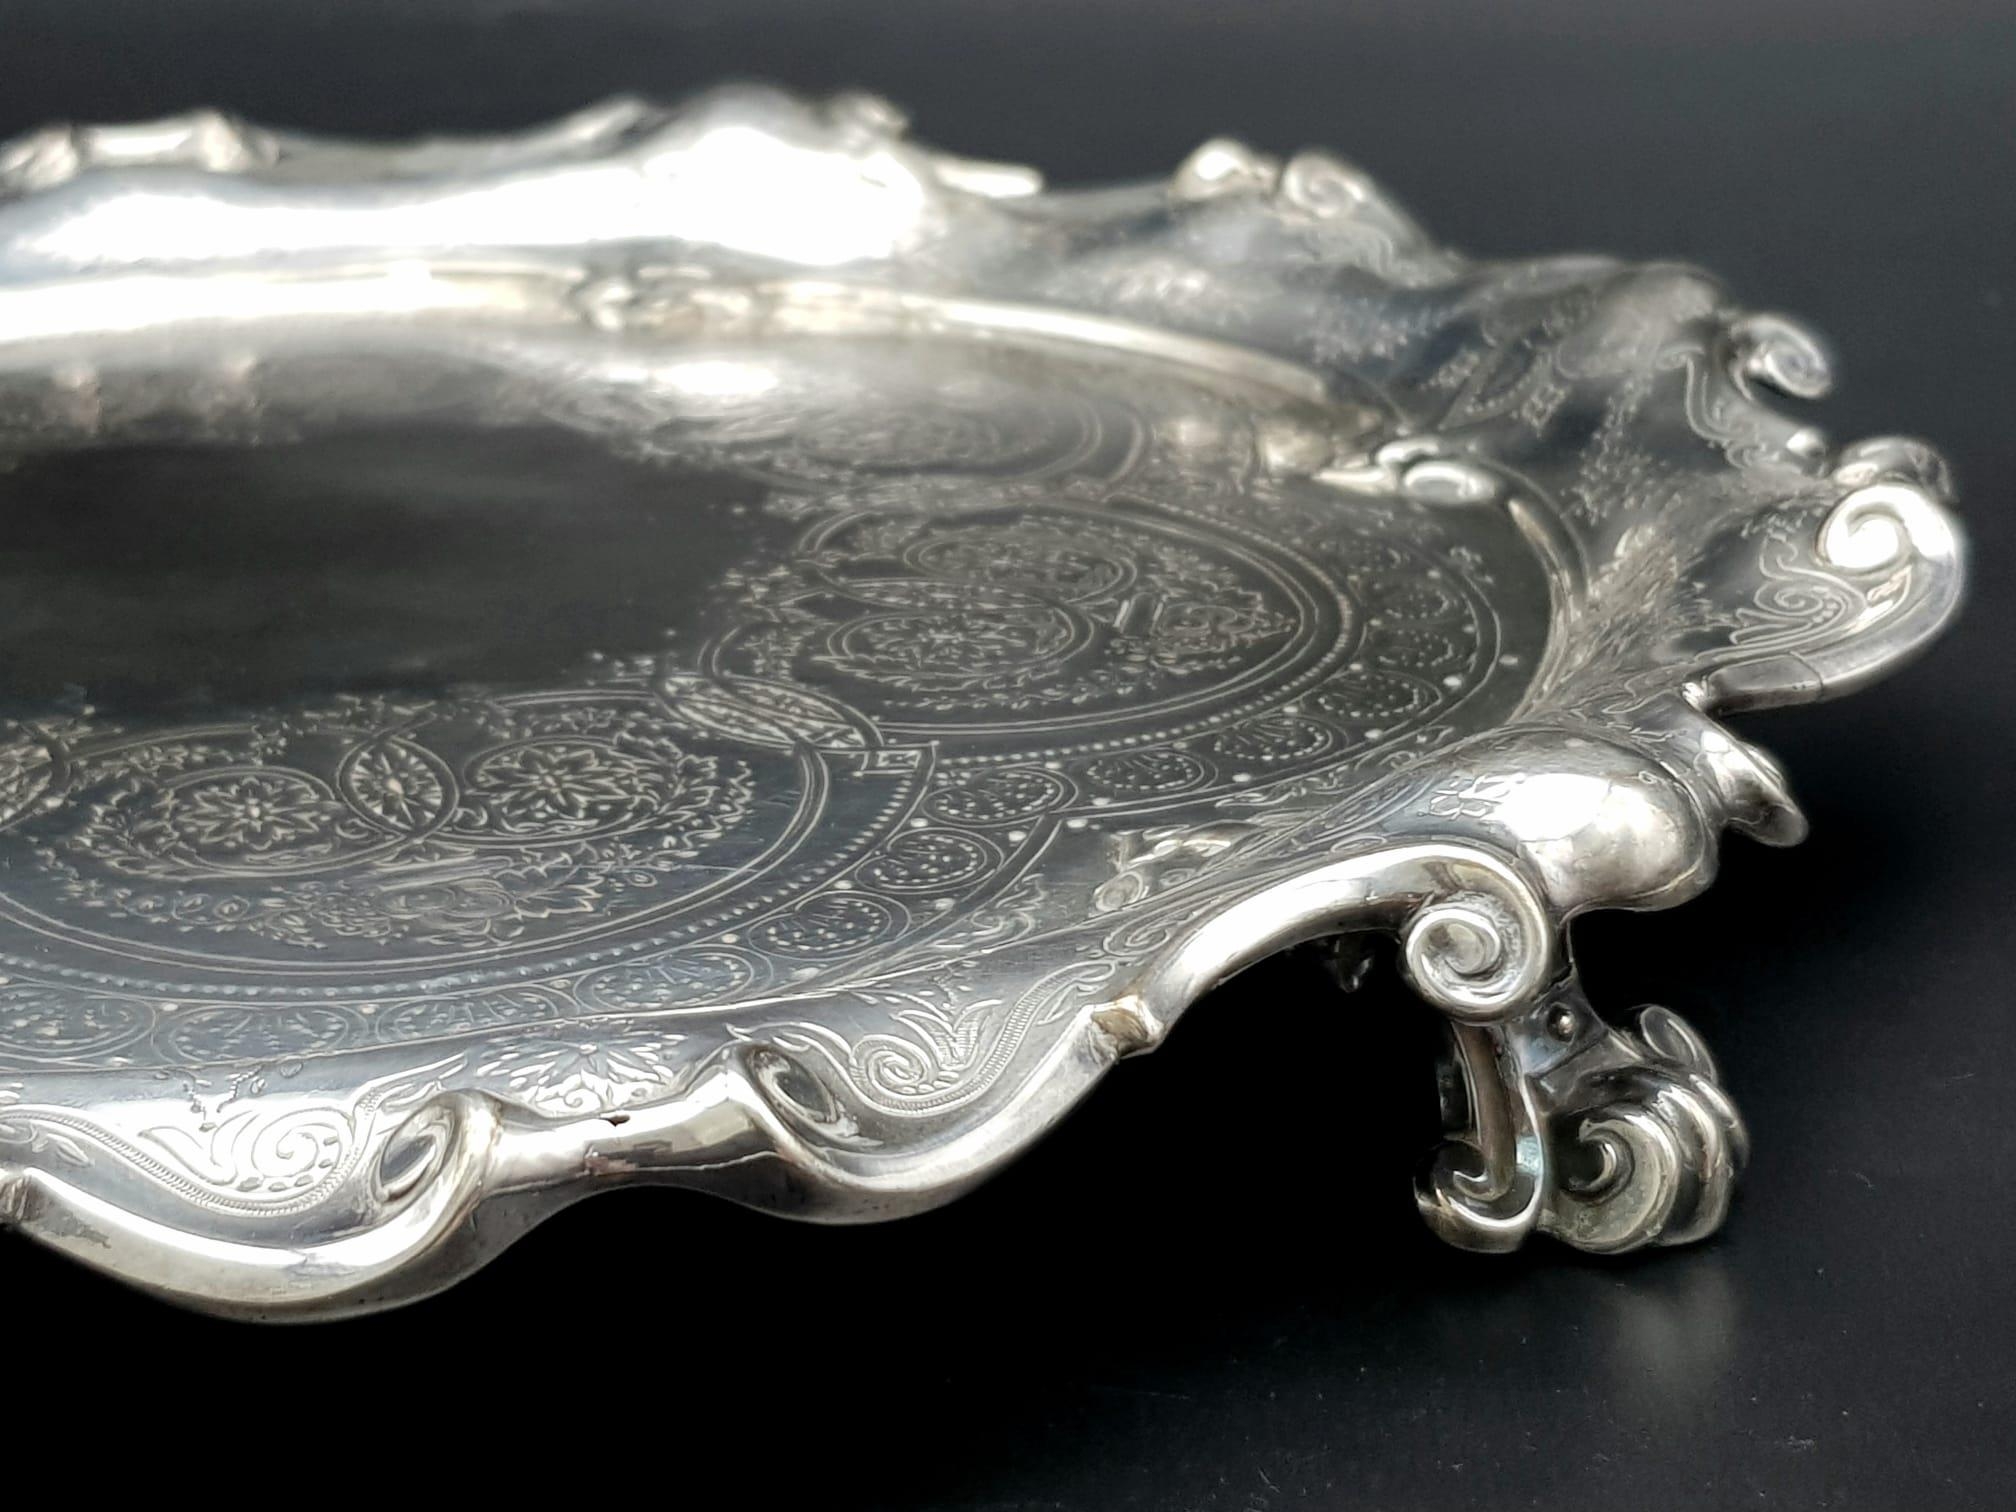 A 761gms solid silver Salva with scrolled edges and hand chased intricate decoration and - Image 5 of 6